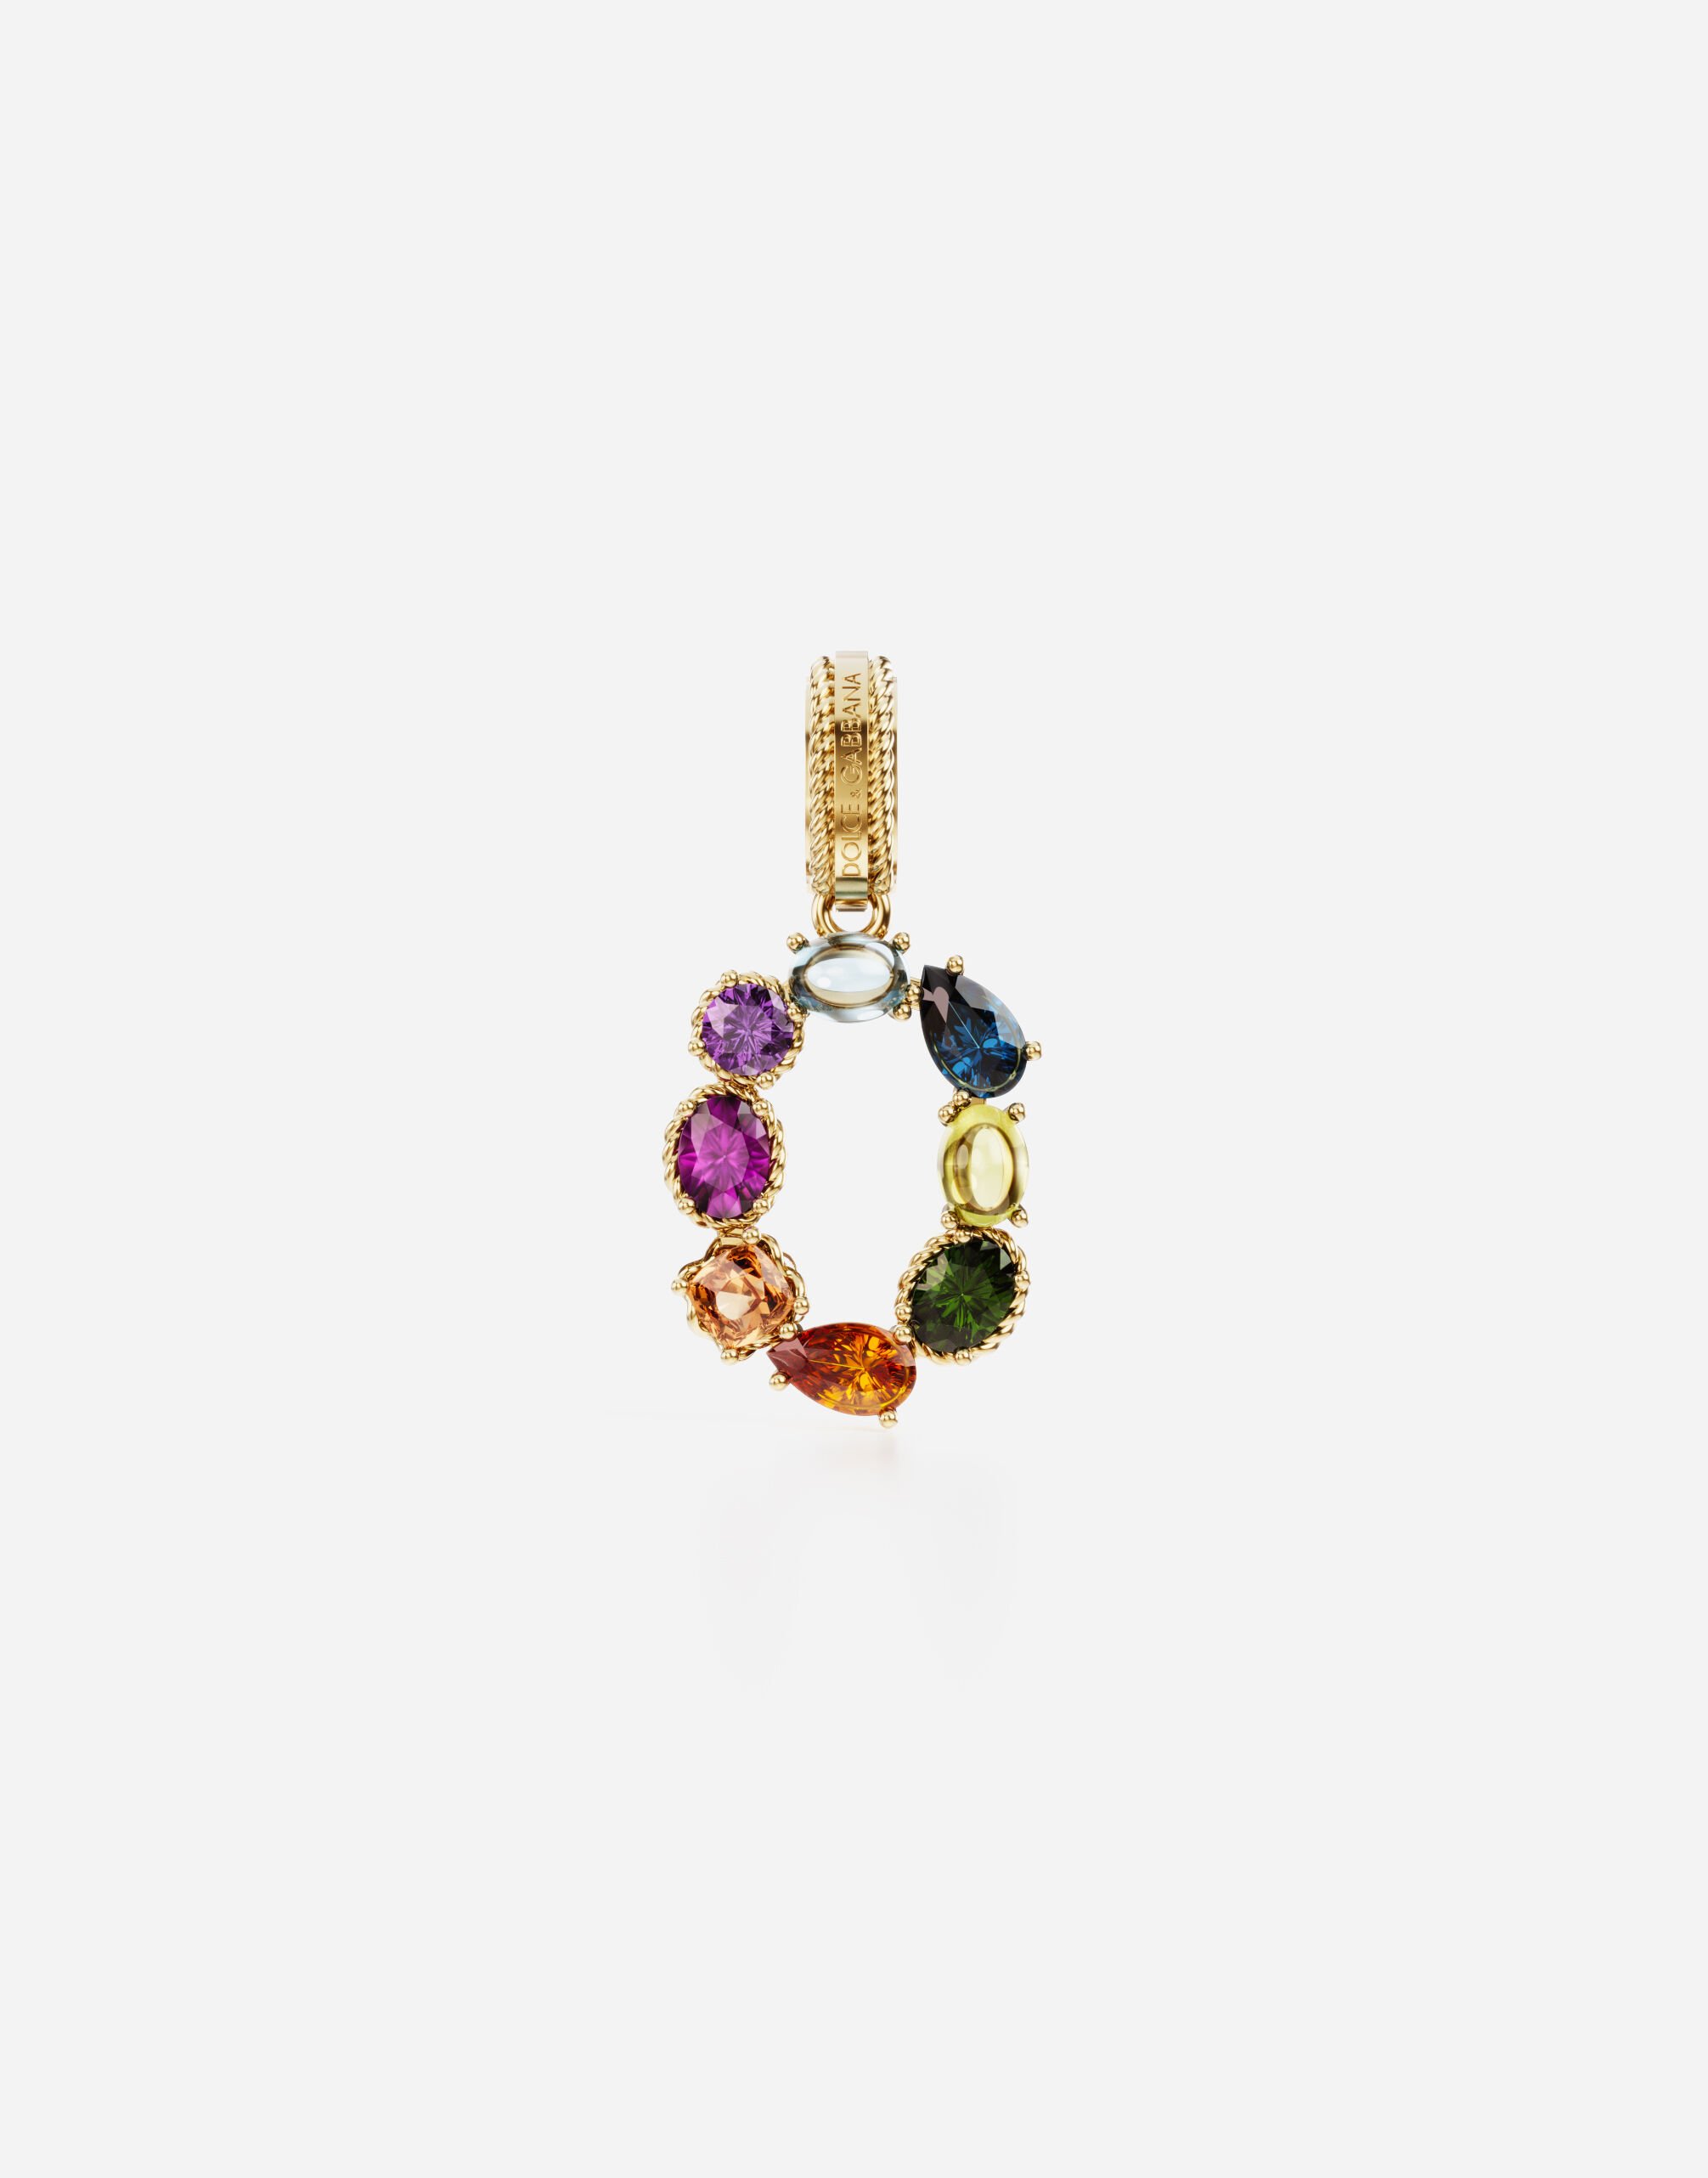 Dolce & Gabbana 18 kt yellow gold rainbow pendant  with multicolor finegemstones representing number 0 Gold WFHK2GWSAPB